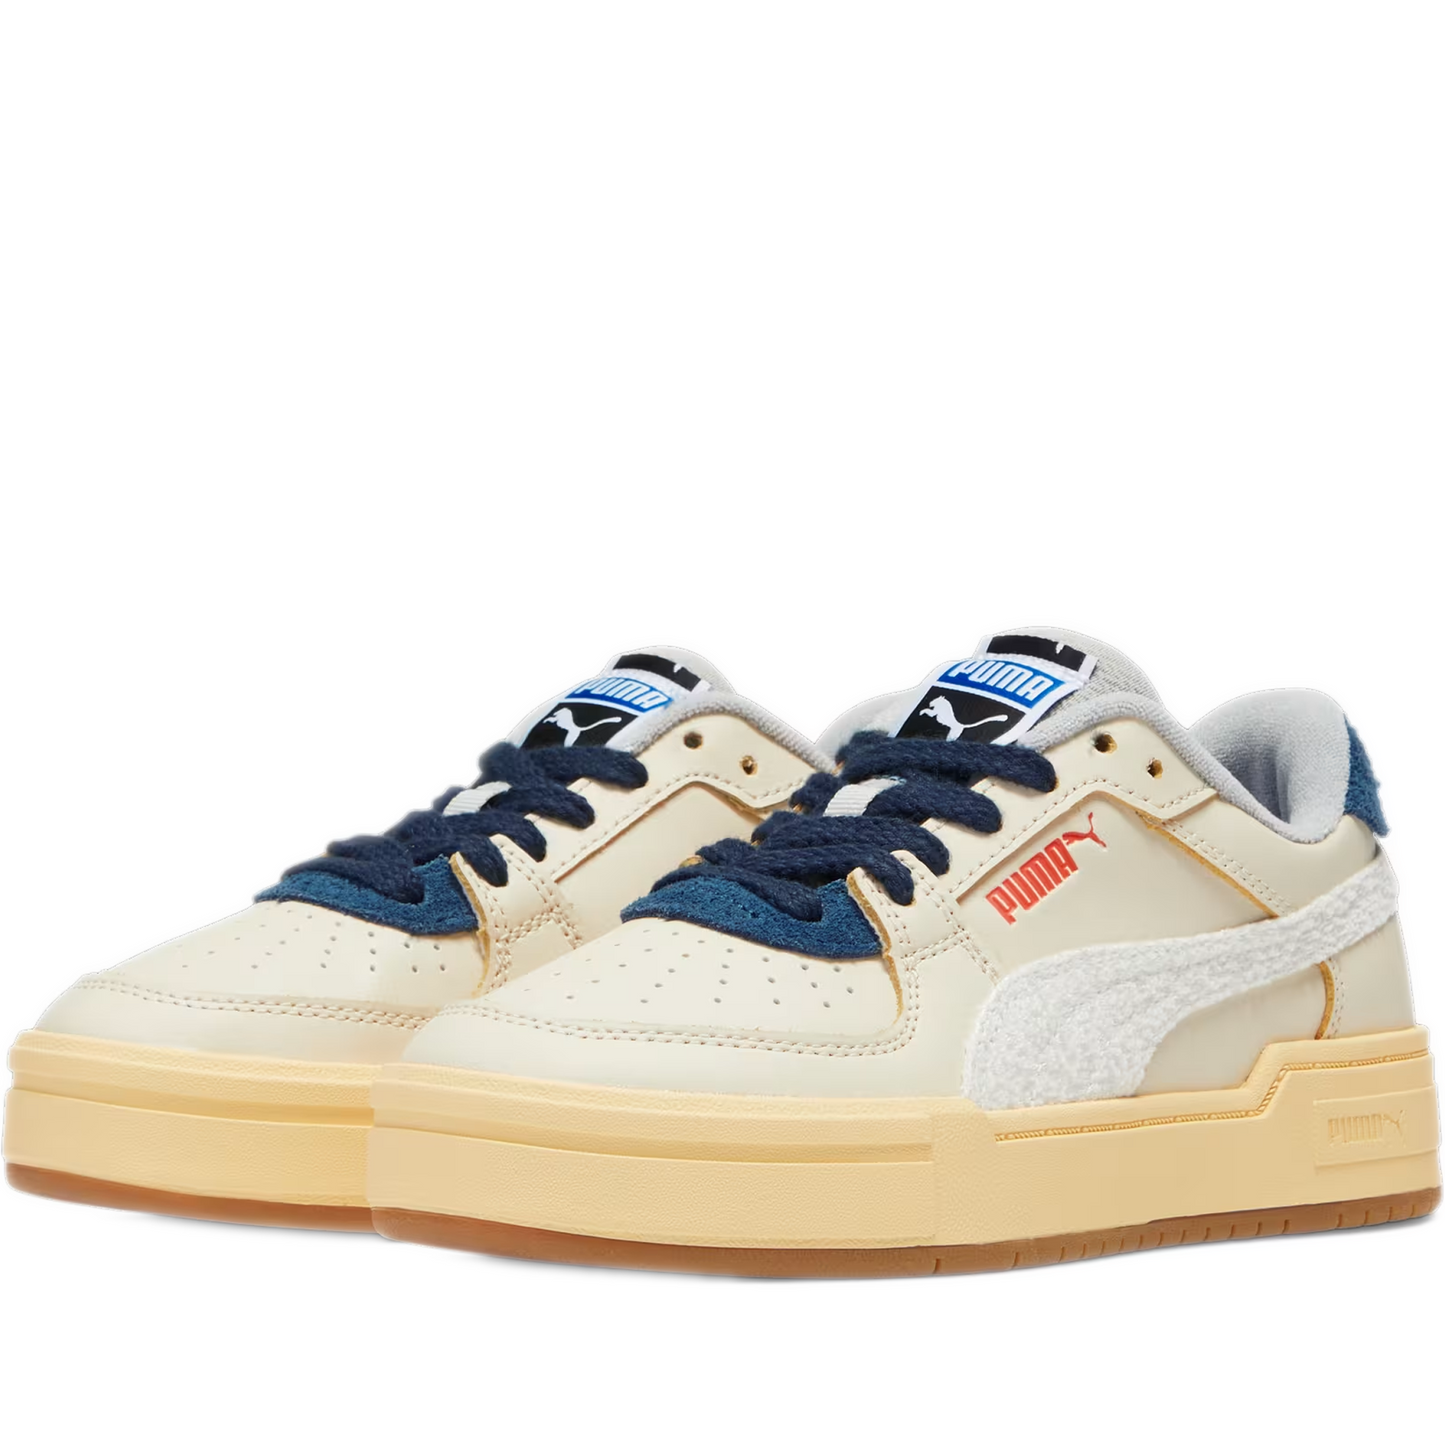 Men's Puma CA Pro Now And Then - White